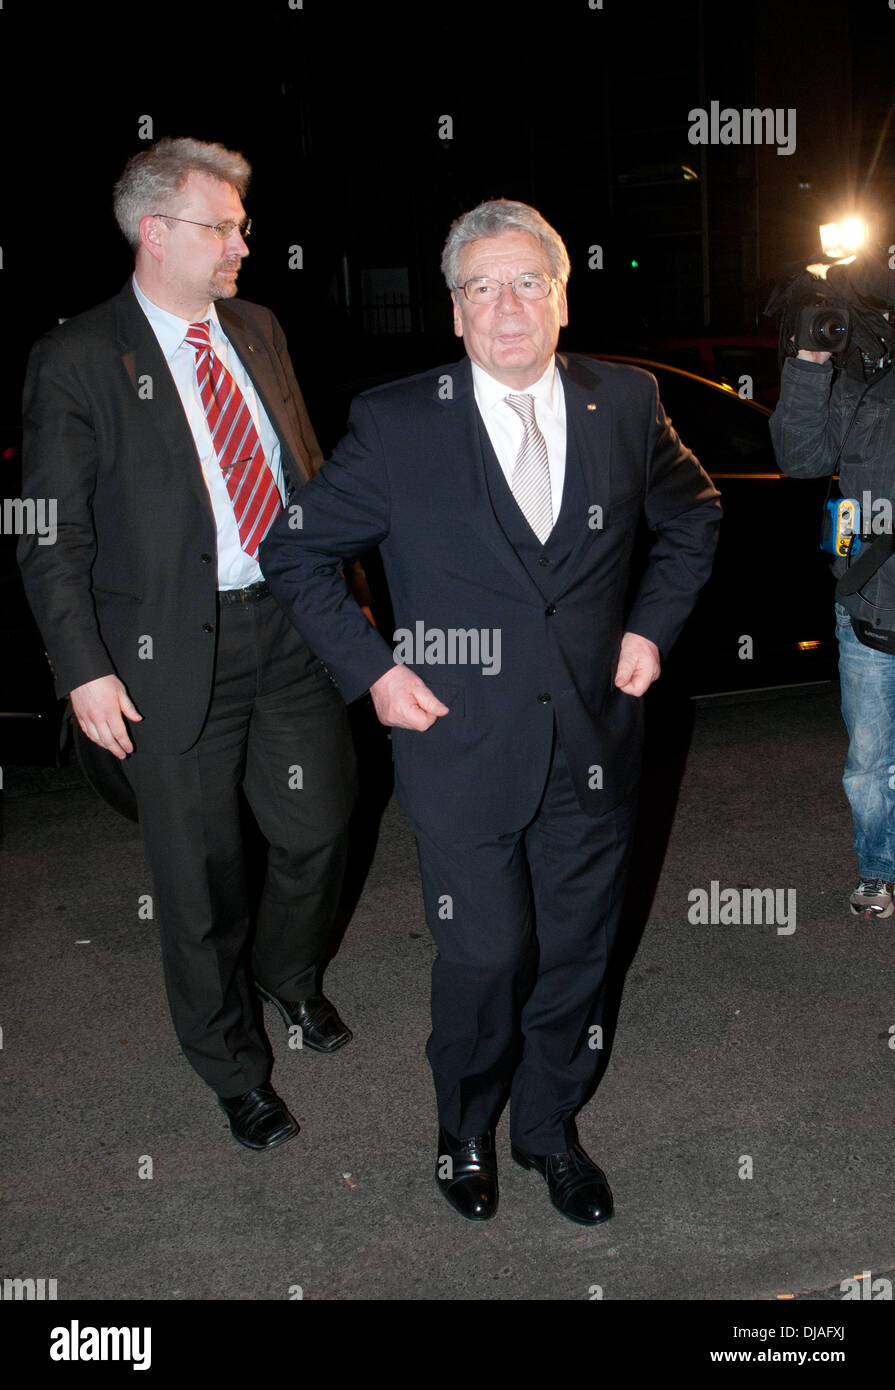 Joachim Gauck arriving at Cafe Einstein on Kurfuerstenstrasse street for a private party after being elected as Germany's new president. Berlin, Germany - 18.03.2012 Stock Photo